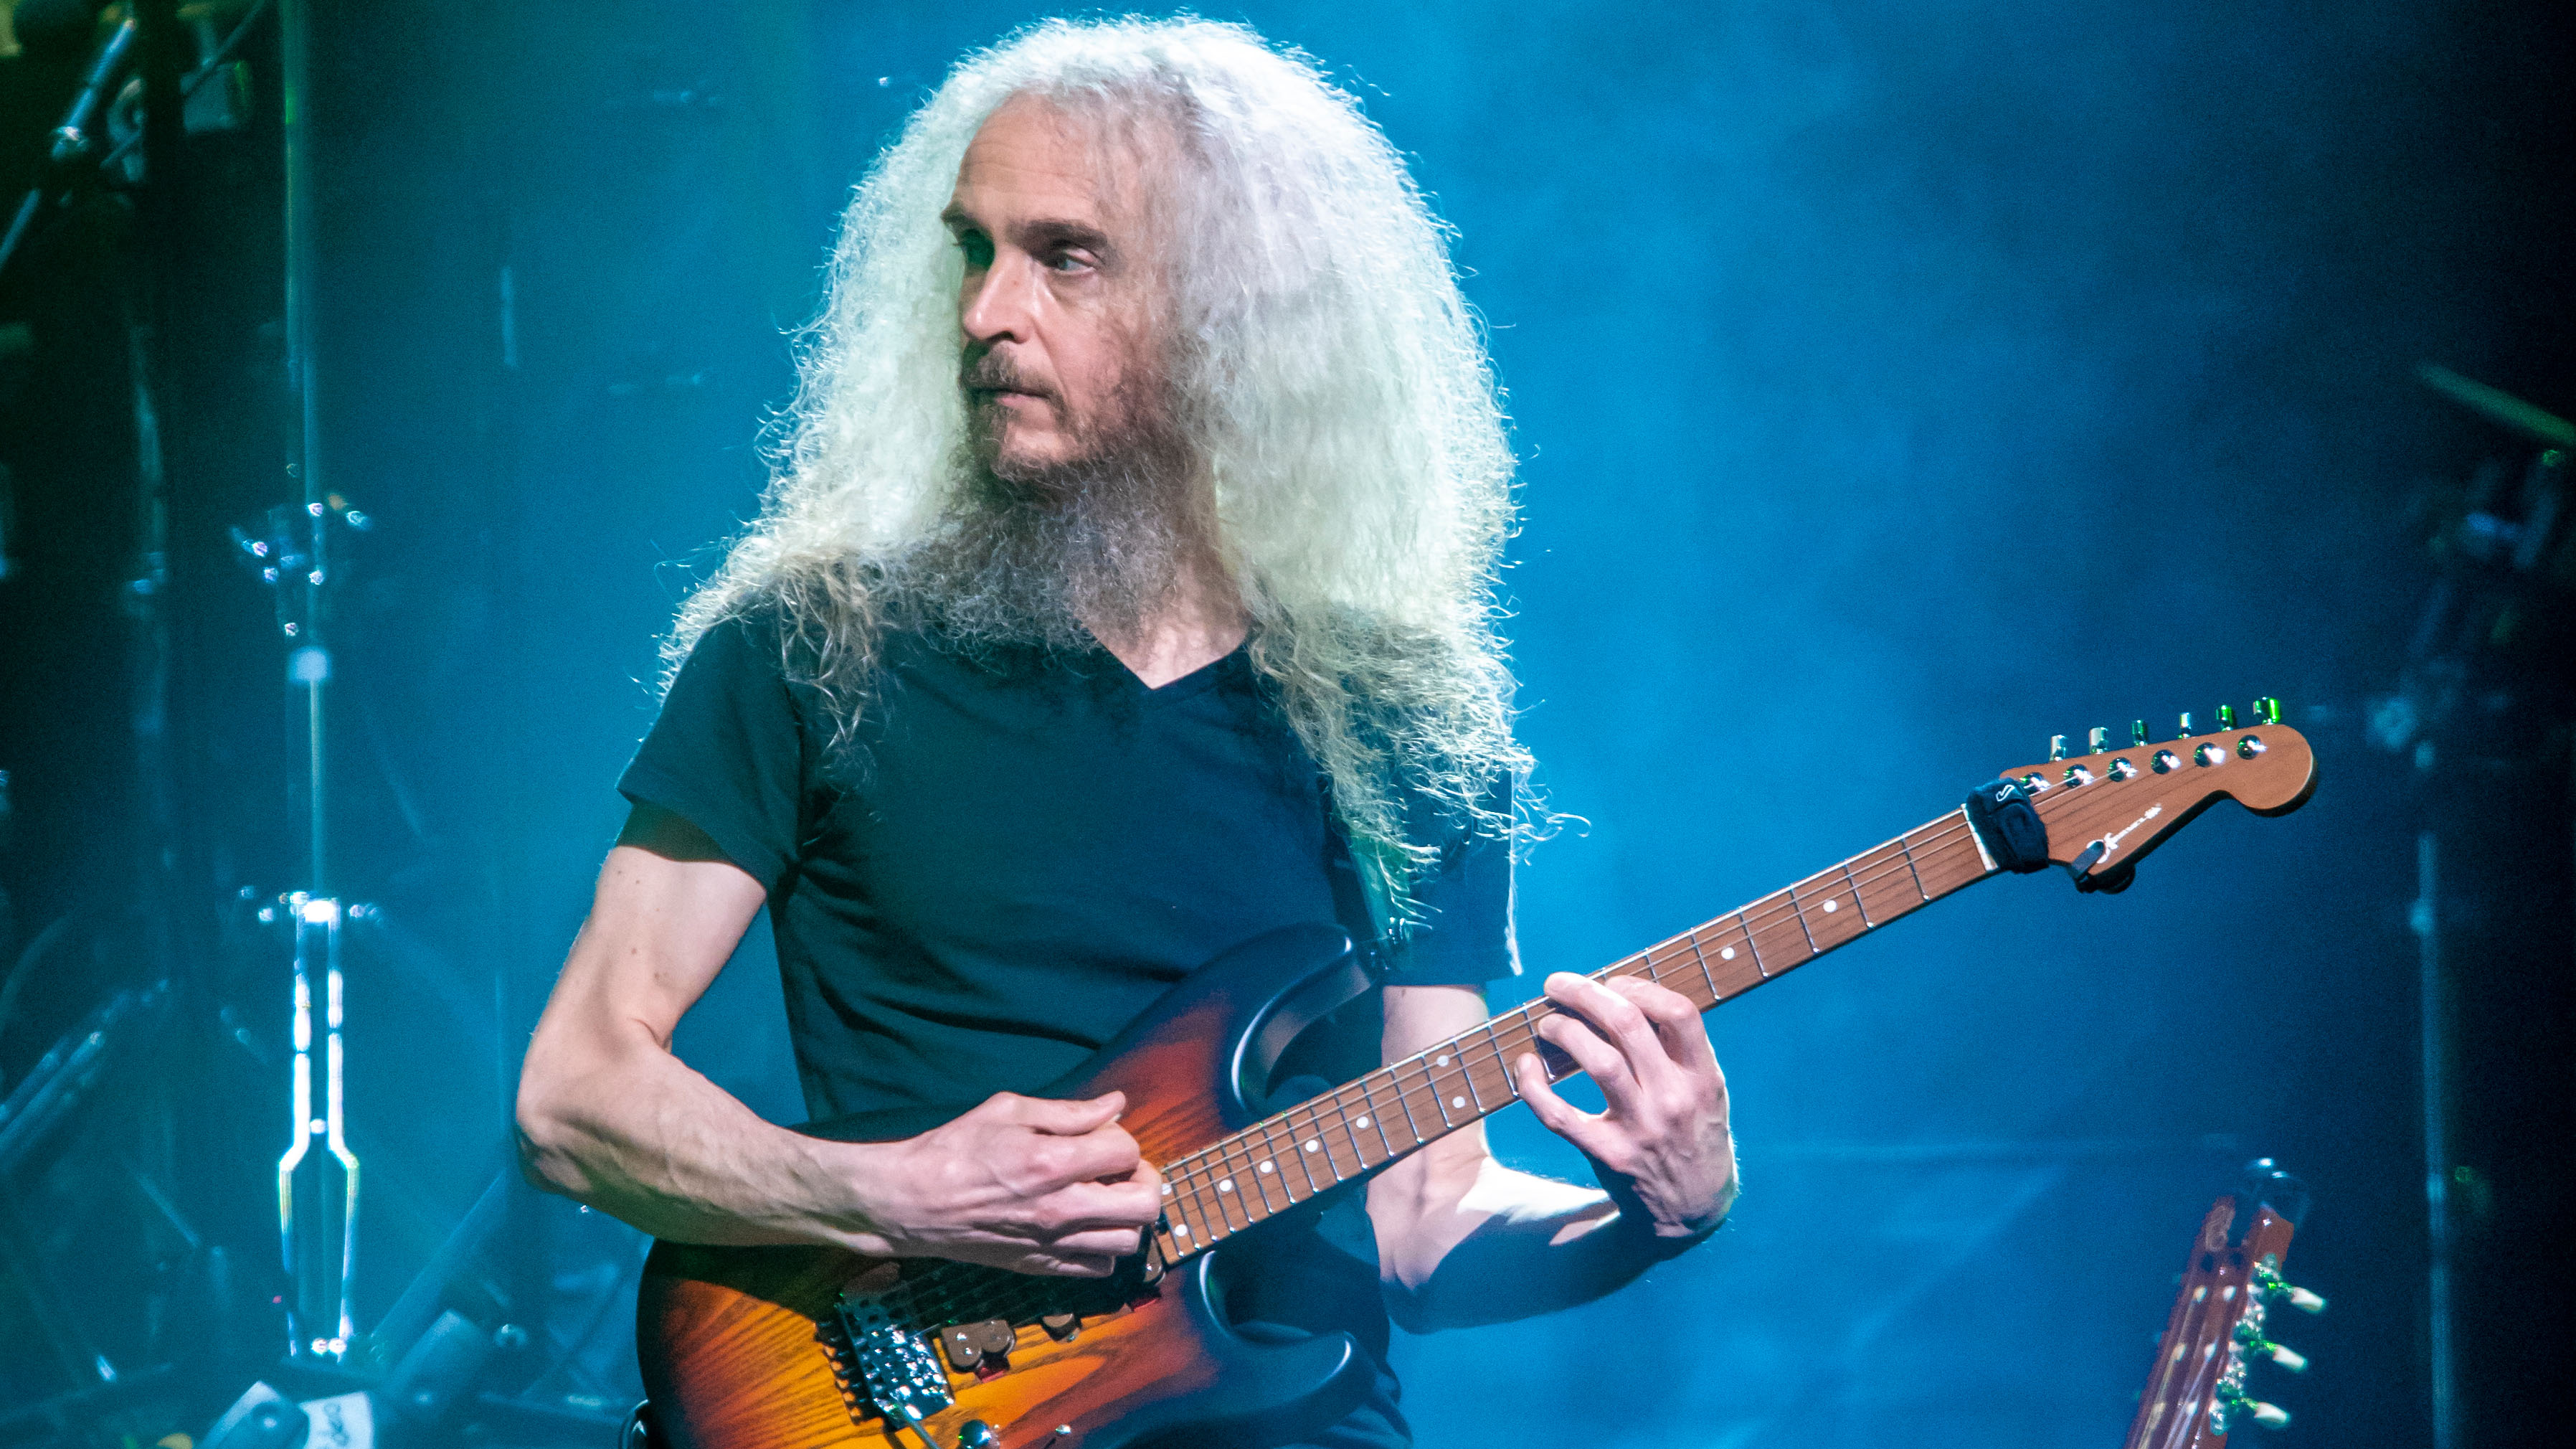 Guthrie Govan explains why he's switched to AxeFx digital modeling